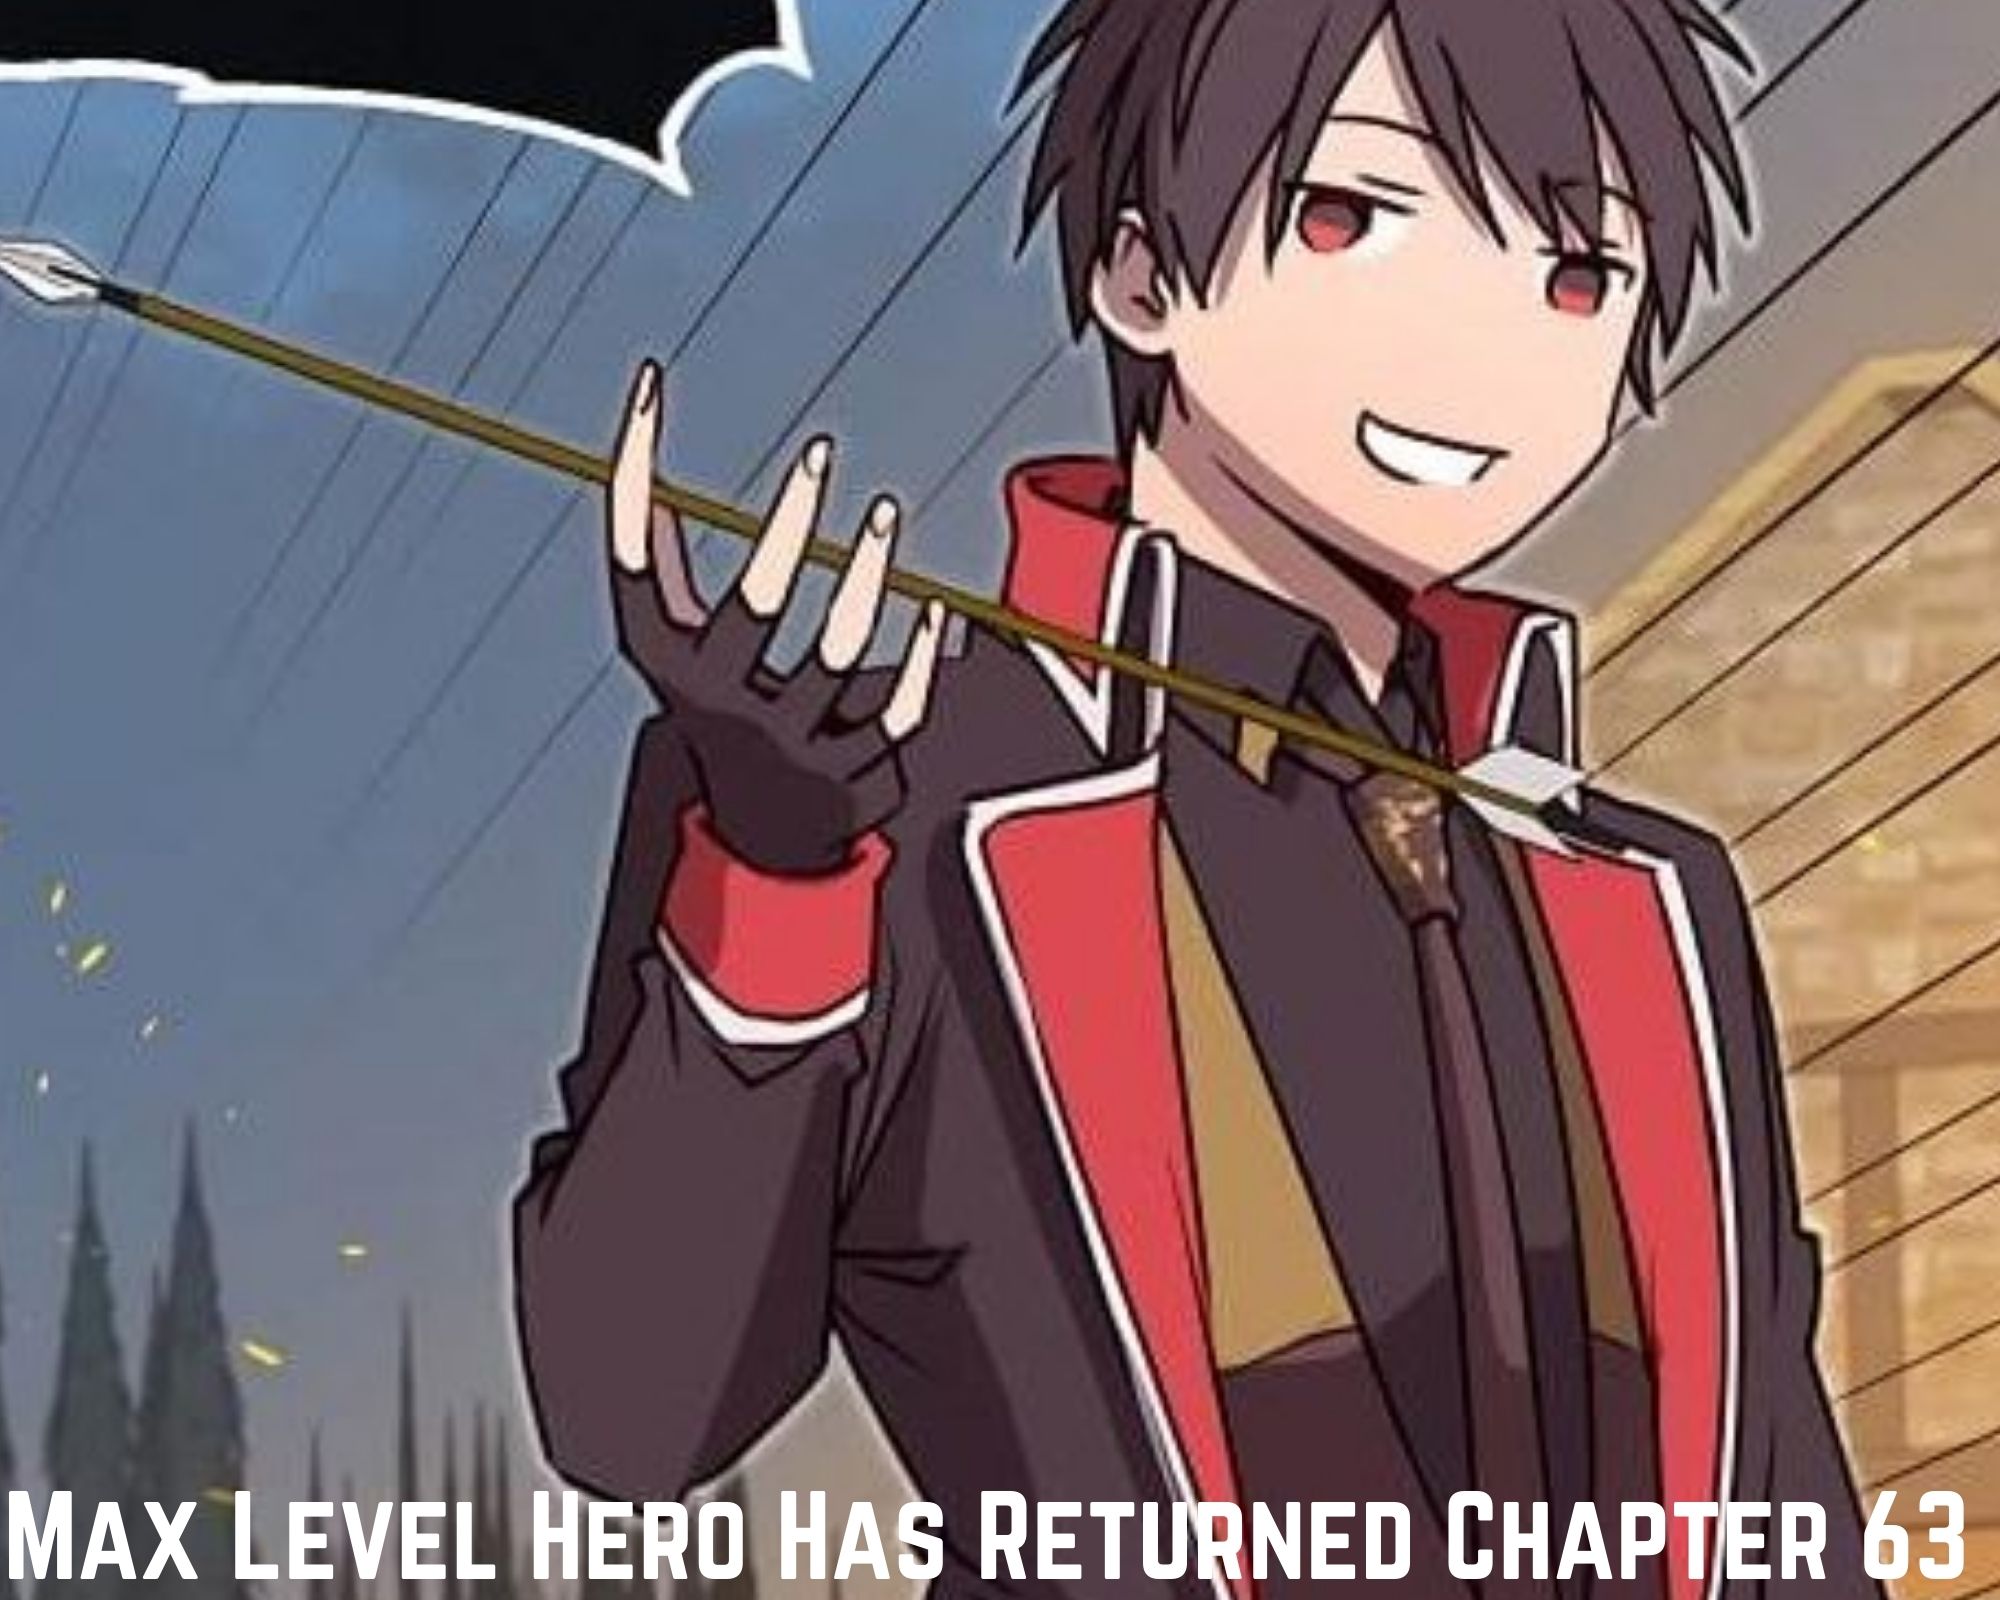 The Max Level Hero Has Returned Chapter 64 Spoiler Review Release Date Cast watch Online